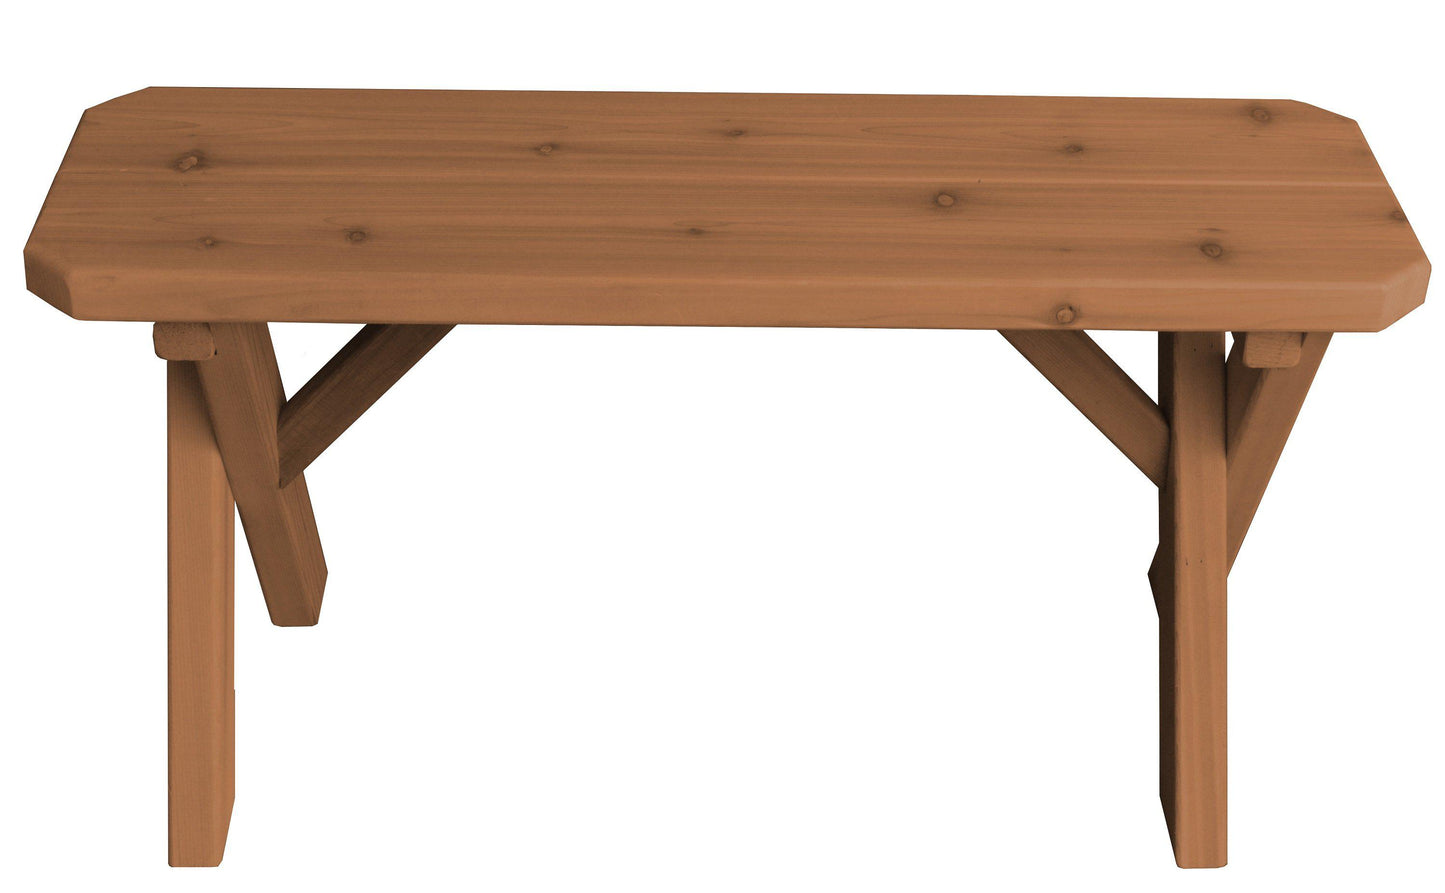 A&L FURNITURE CO. Western Red Cedar 33" Crossleg Bench Only - LEAD TIME TO SHIP 4 WEEKS OR LESS